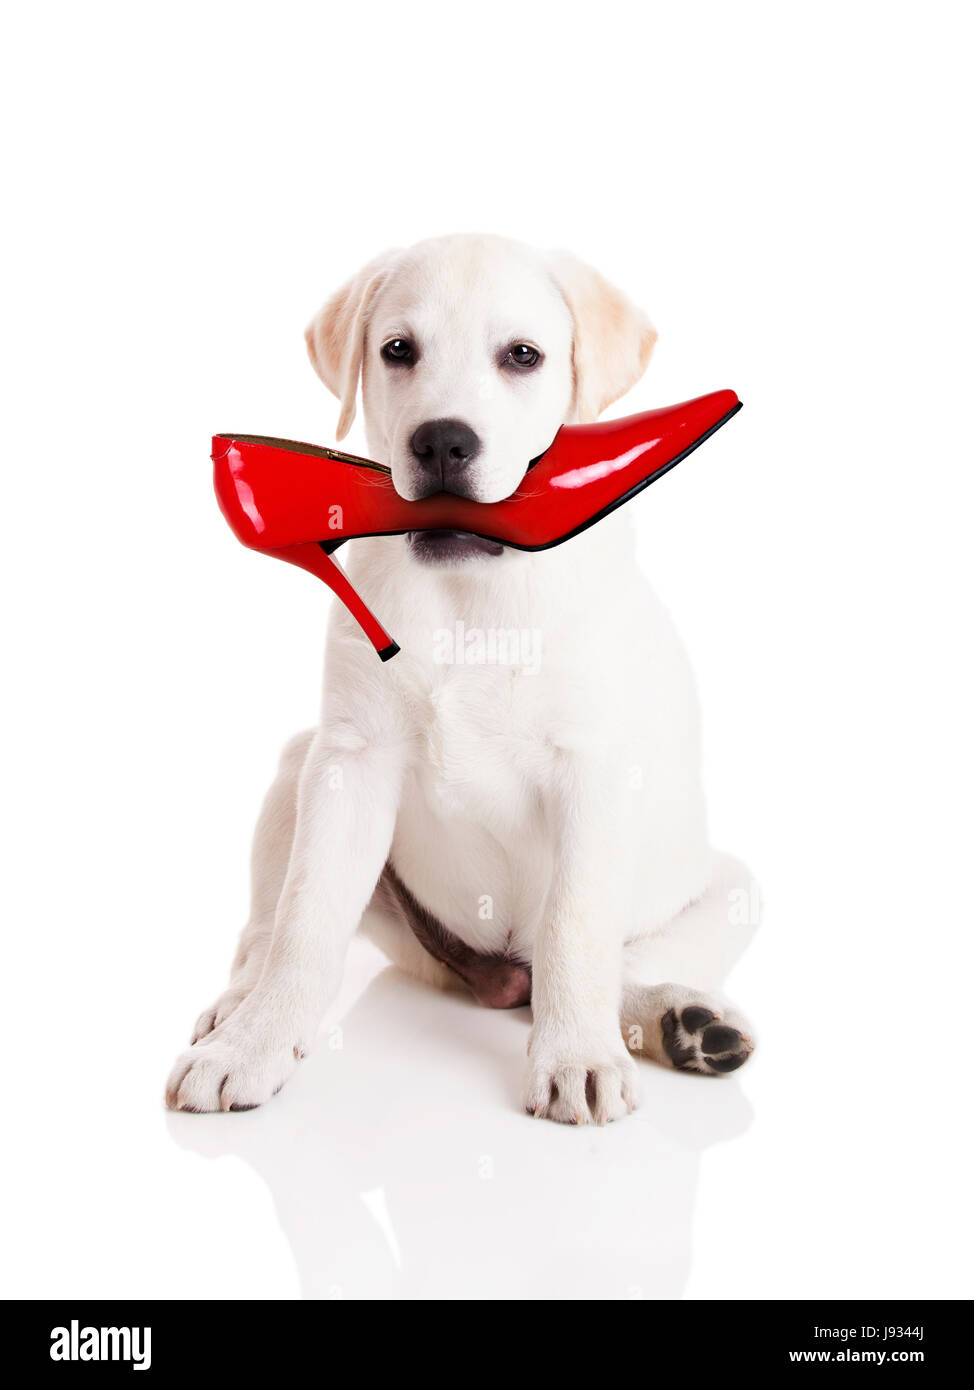 Naughty Labrador Puppy High Resolution Stock Photography and Images - Alamy